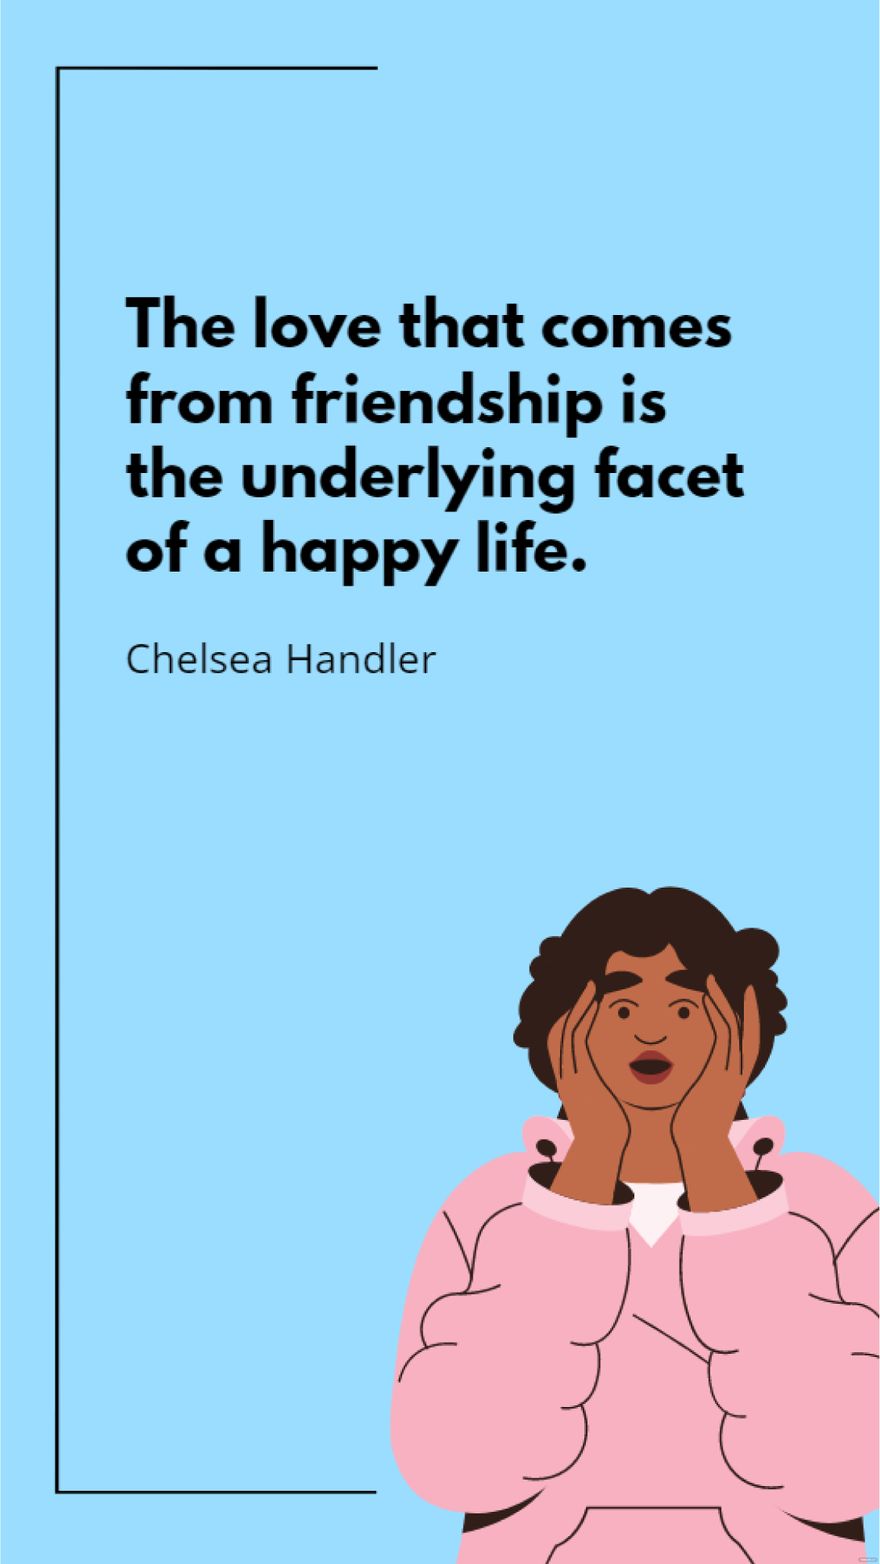 Chelsea Handler - The love that comes from friendship is the underlying facet of a happy life.